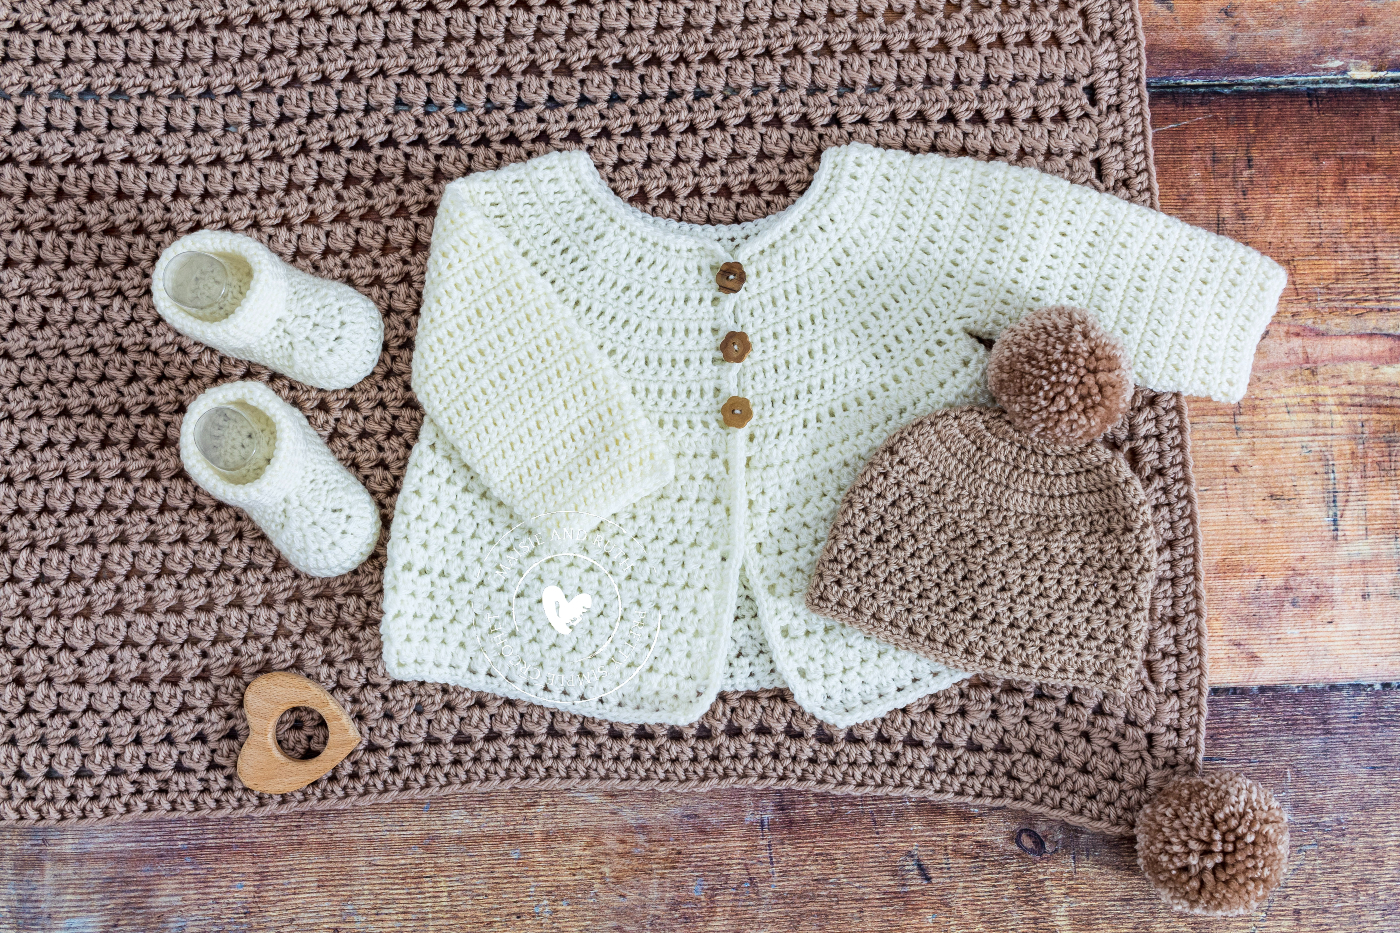 Baby Booties with matching items